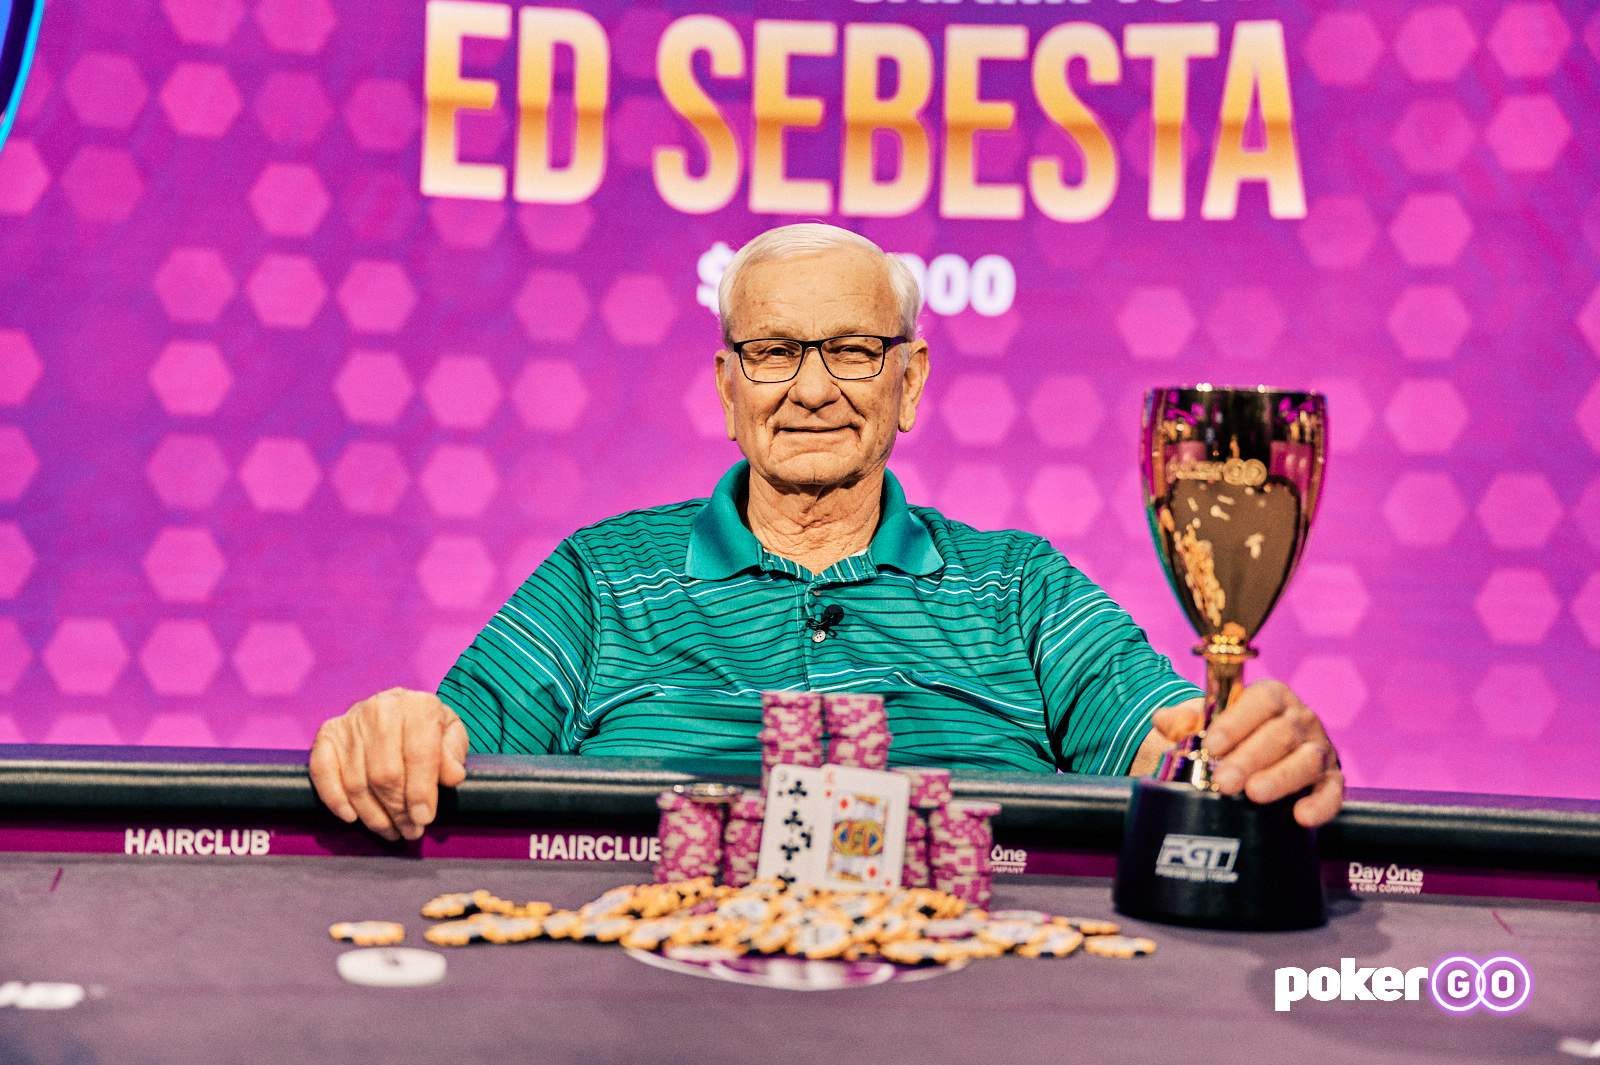 Ed Sebesta Wins PokerGO Cup Event #3 for $216,000